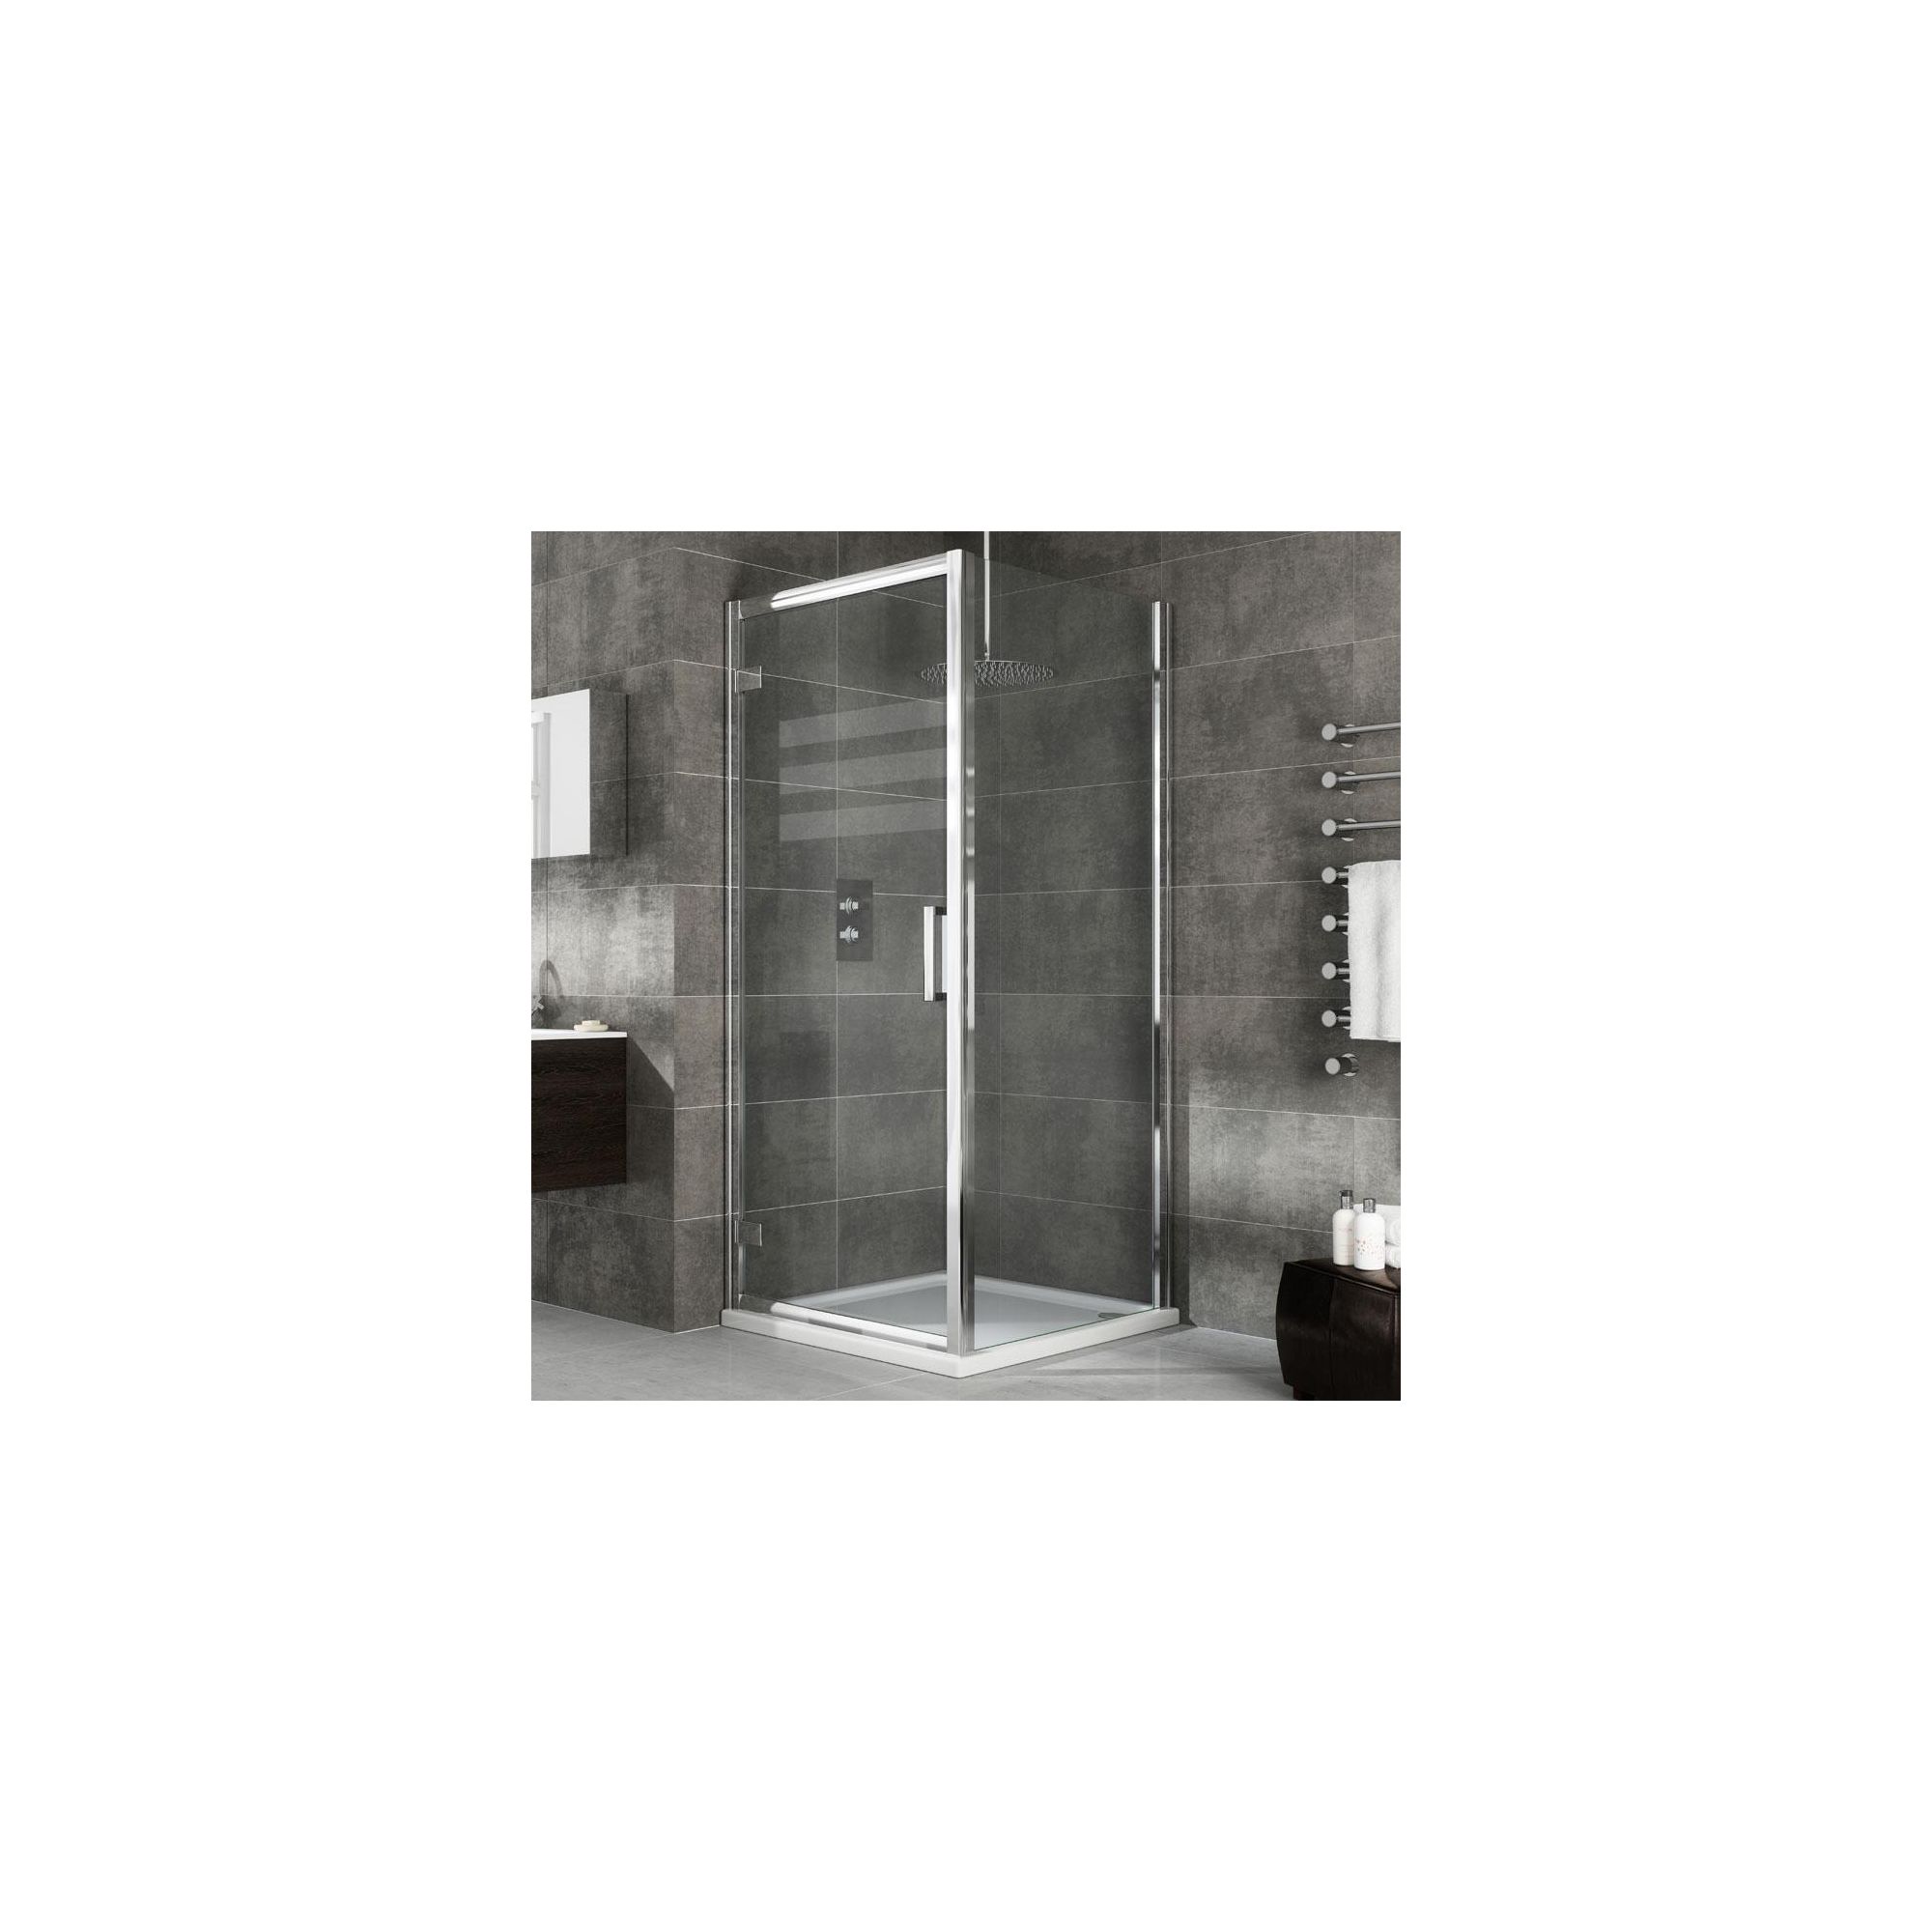 Elemis Eternity Hinged Door Shower Enclosure, 1000mm x 900mm, 8mm Glass, Low Profile Tray at Tesco Direct